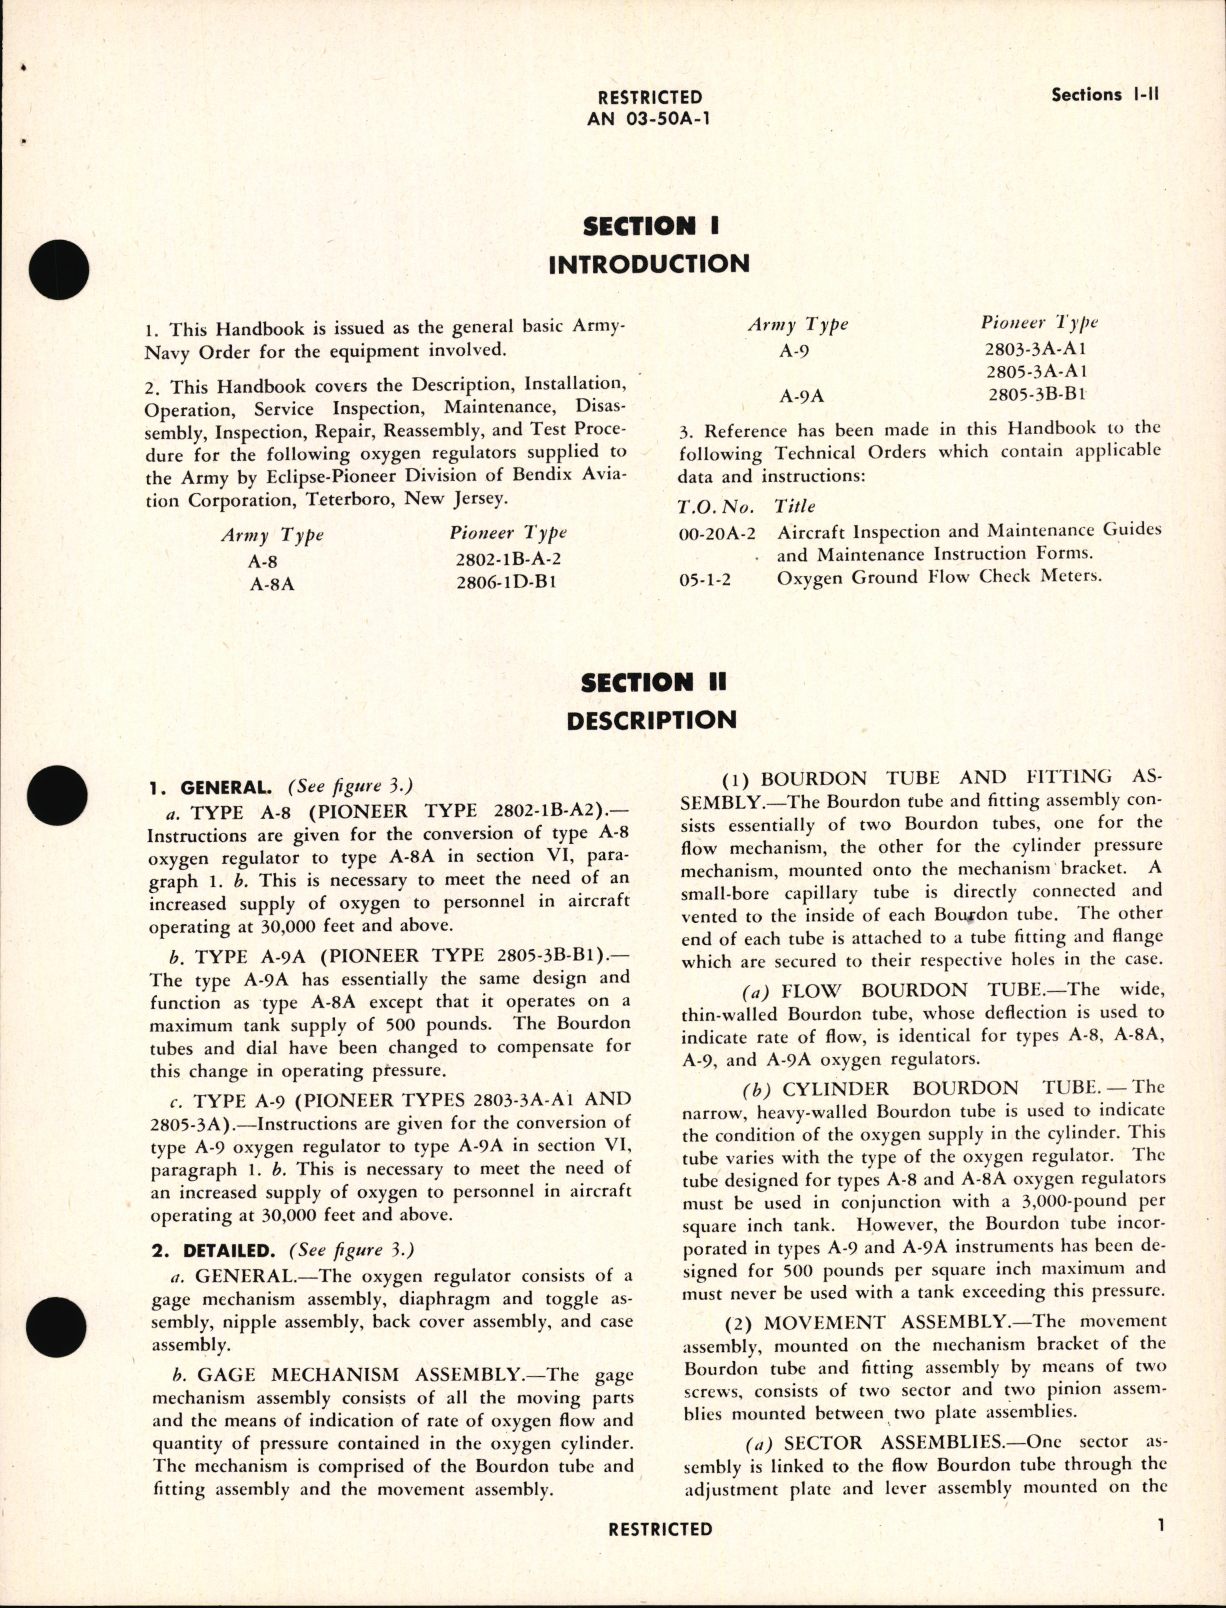 Sample page 7 from AirCorps Library document: Handbook of Instructions with Parts Catalog for Oxygen Regulators